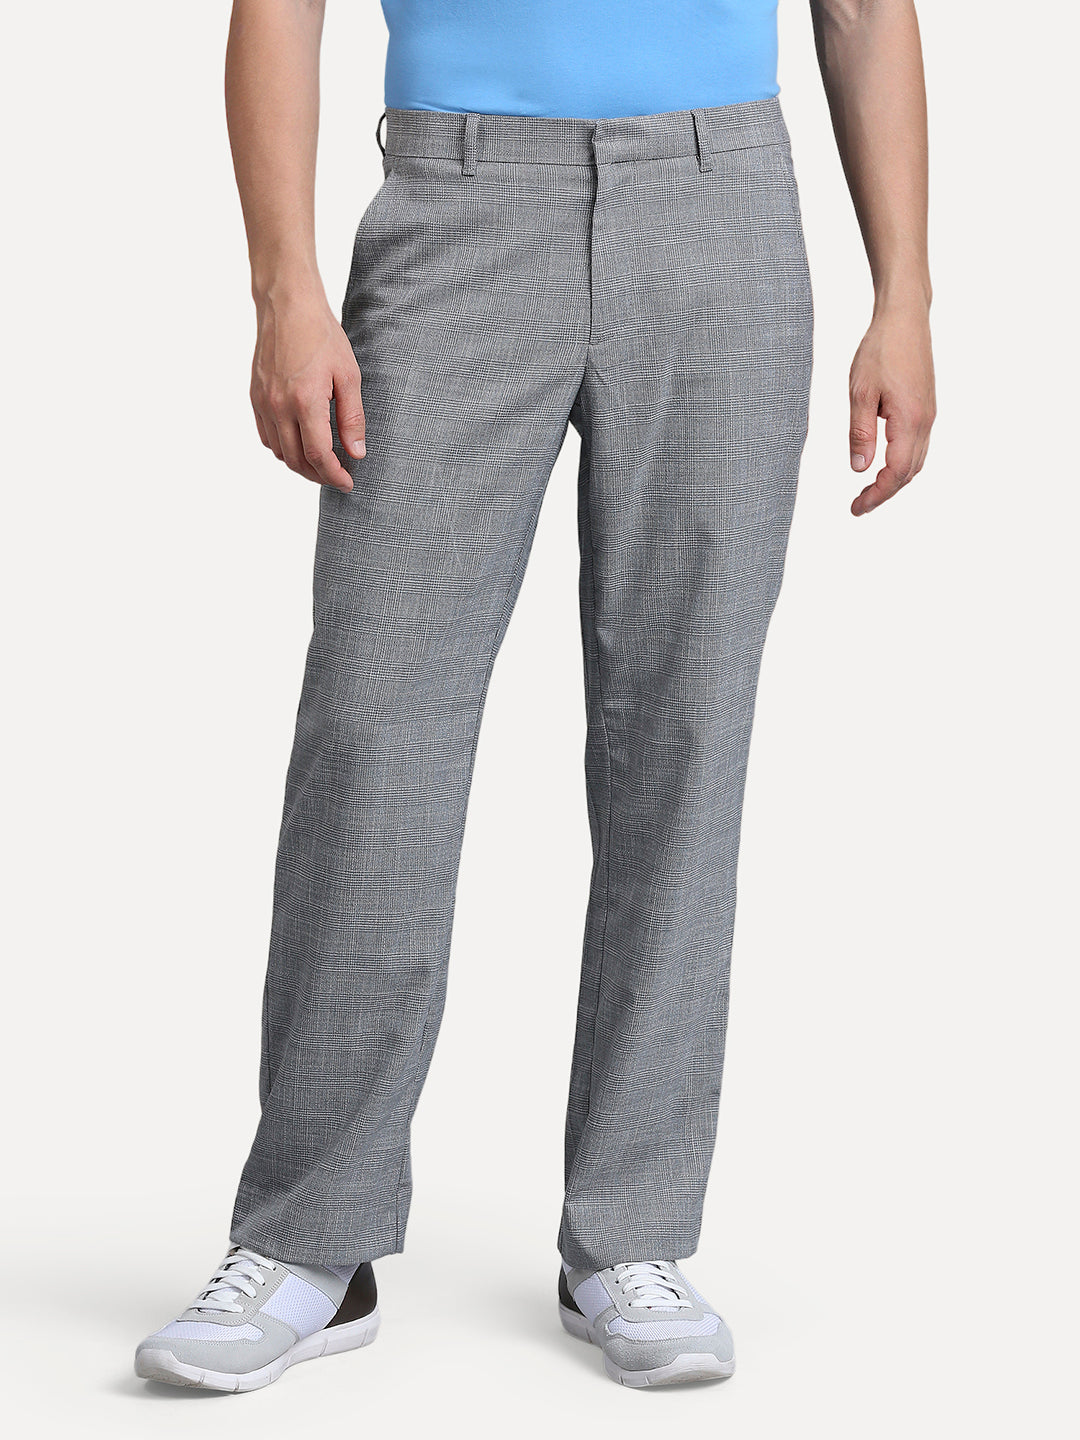 Soft Touch Grey Glide Trouser